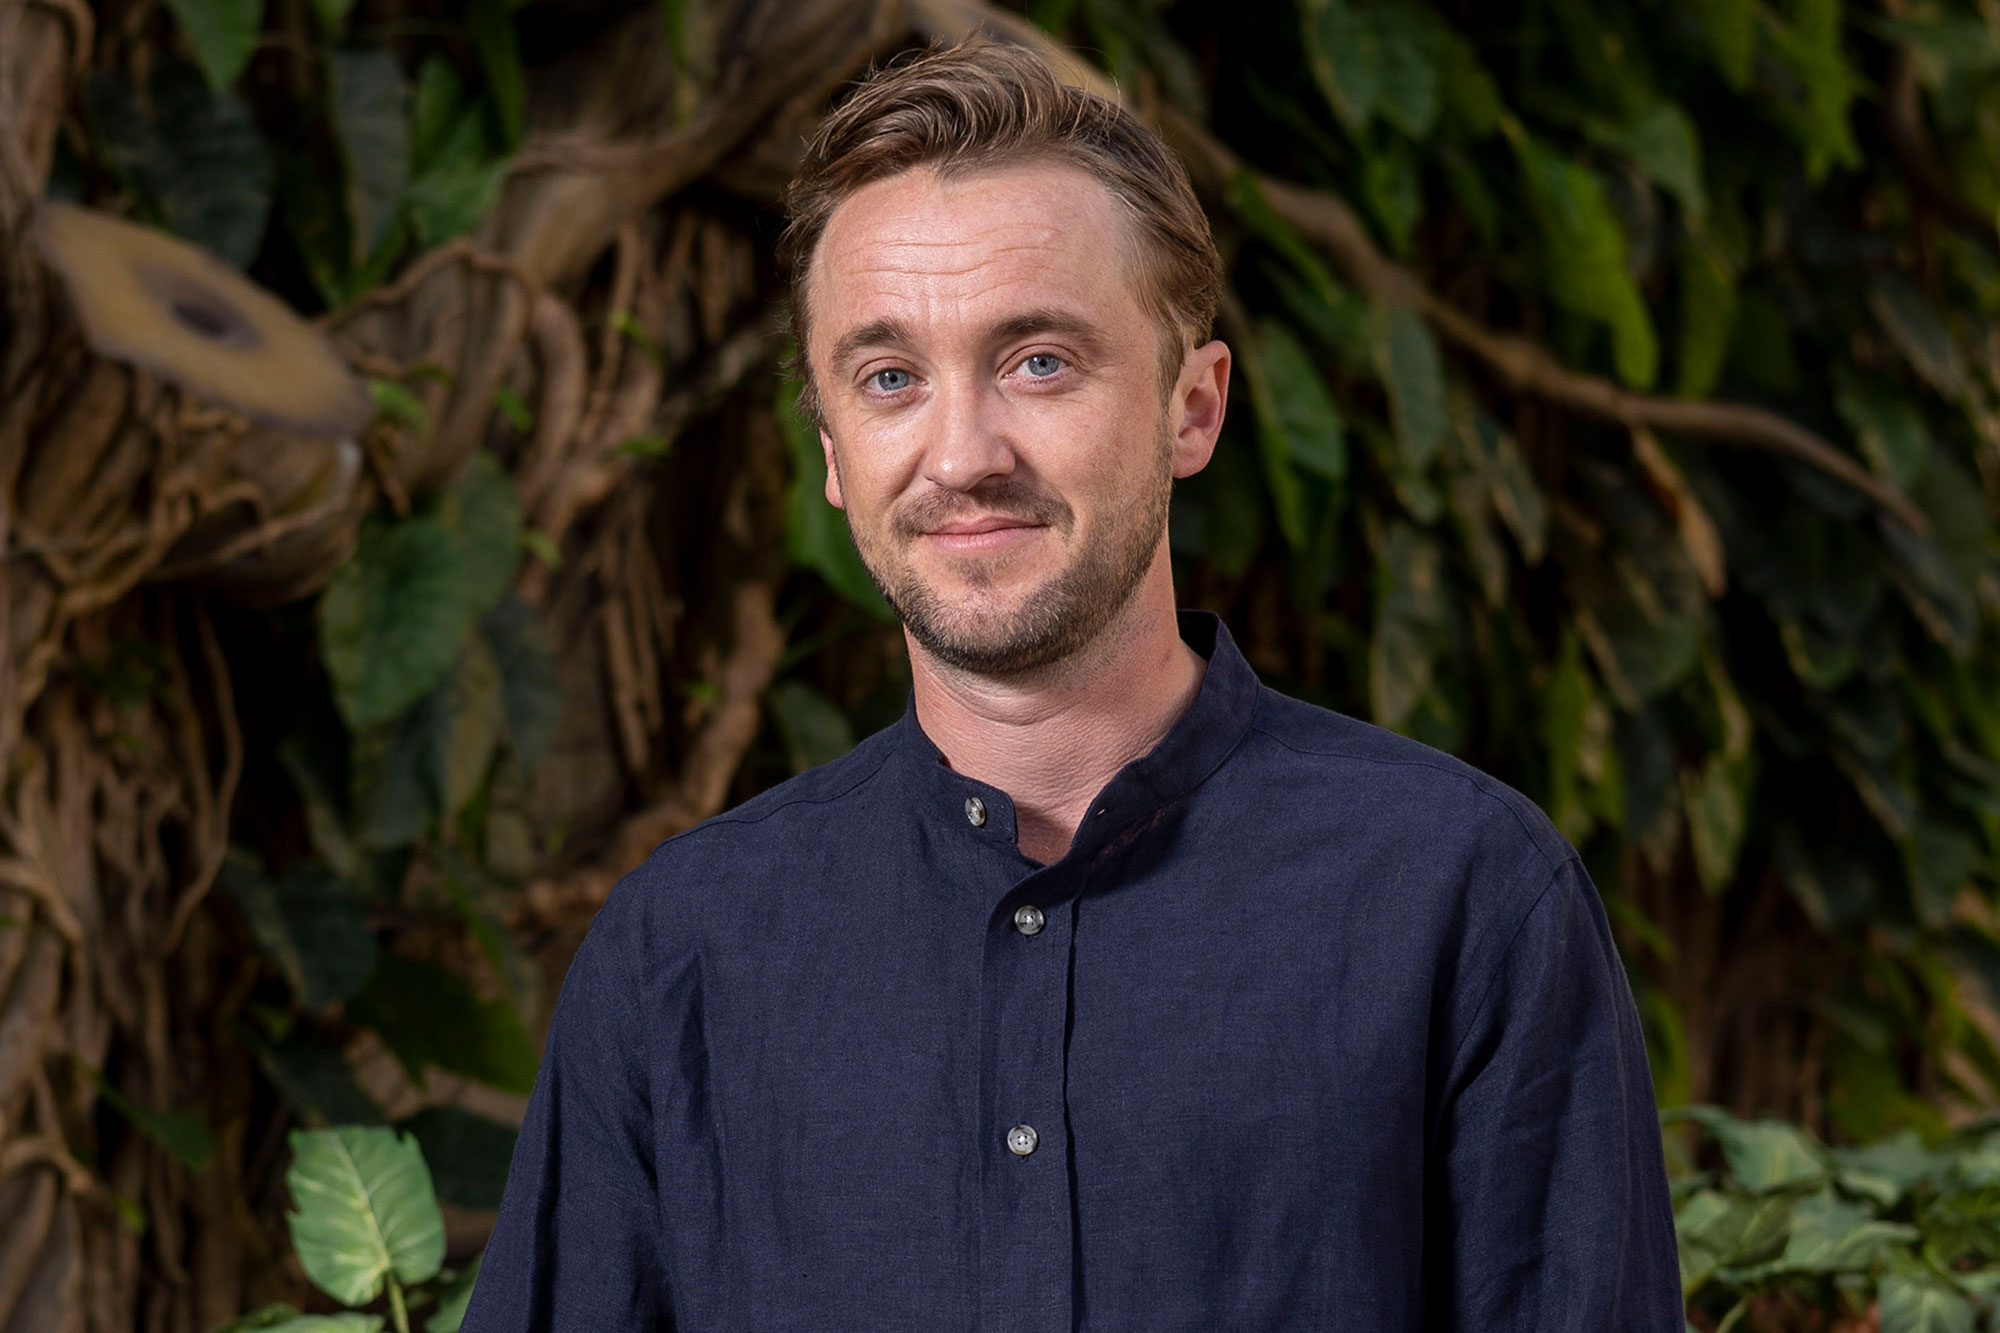 Harry Potter's Tom Felton details struggles with mental health & alcohol abuse in his memoir 'Beyond the Wand'